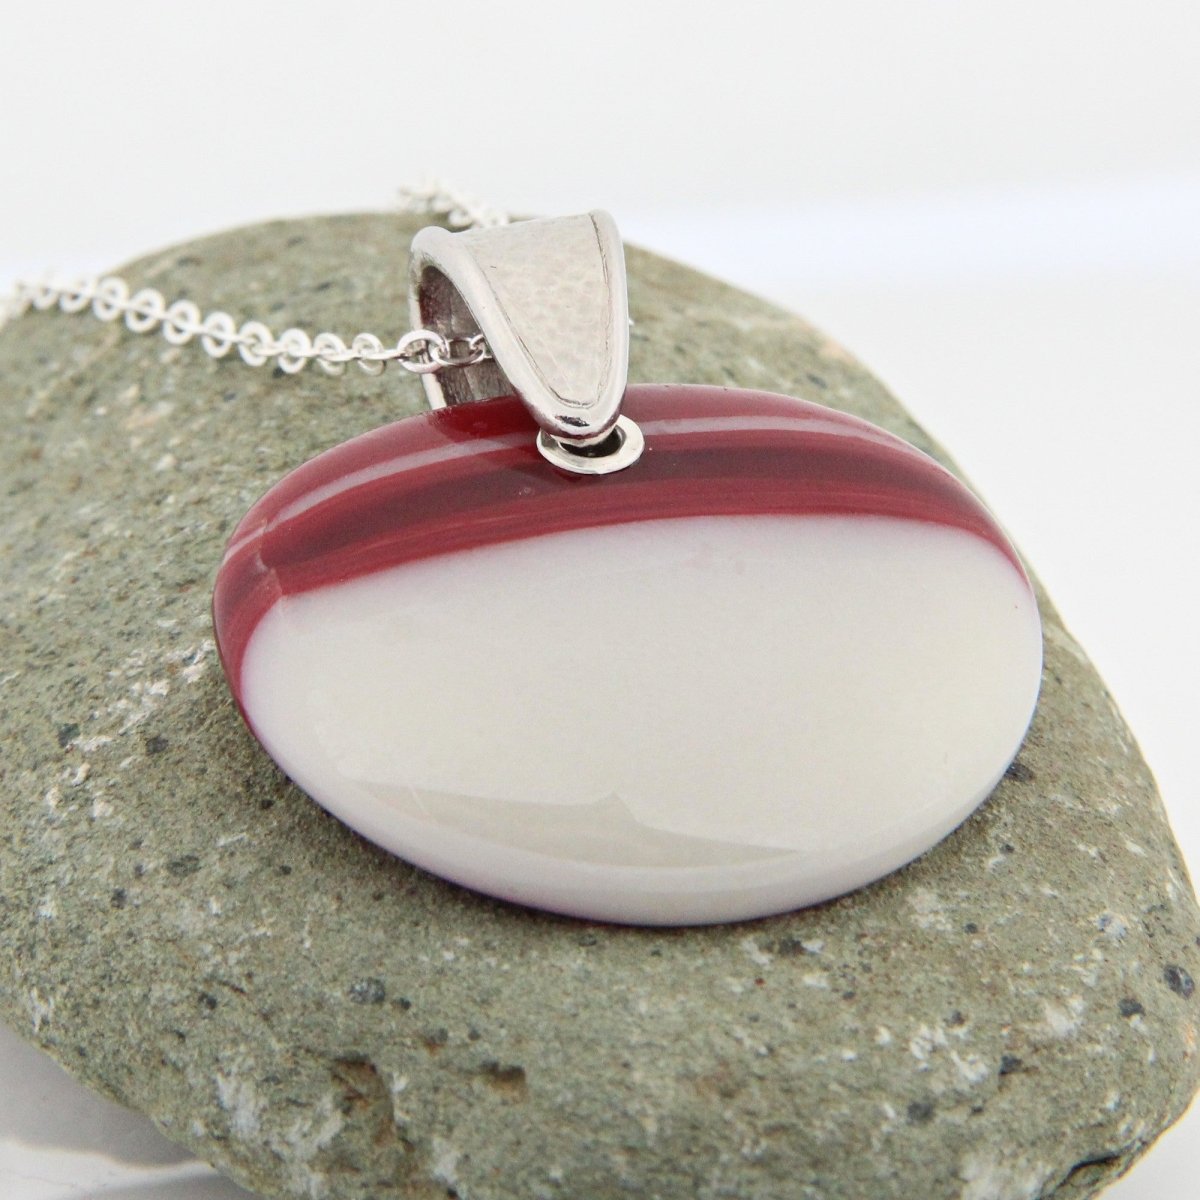 Red and Ivory Glass Pendant with Silver Accents, Handmade Unique Glass Jewelry, Gift for Art Lover